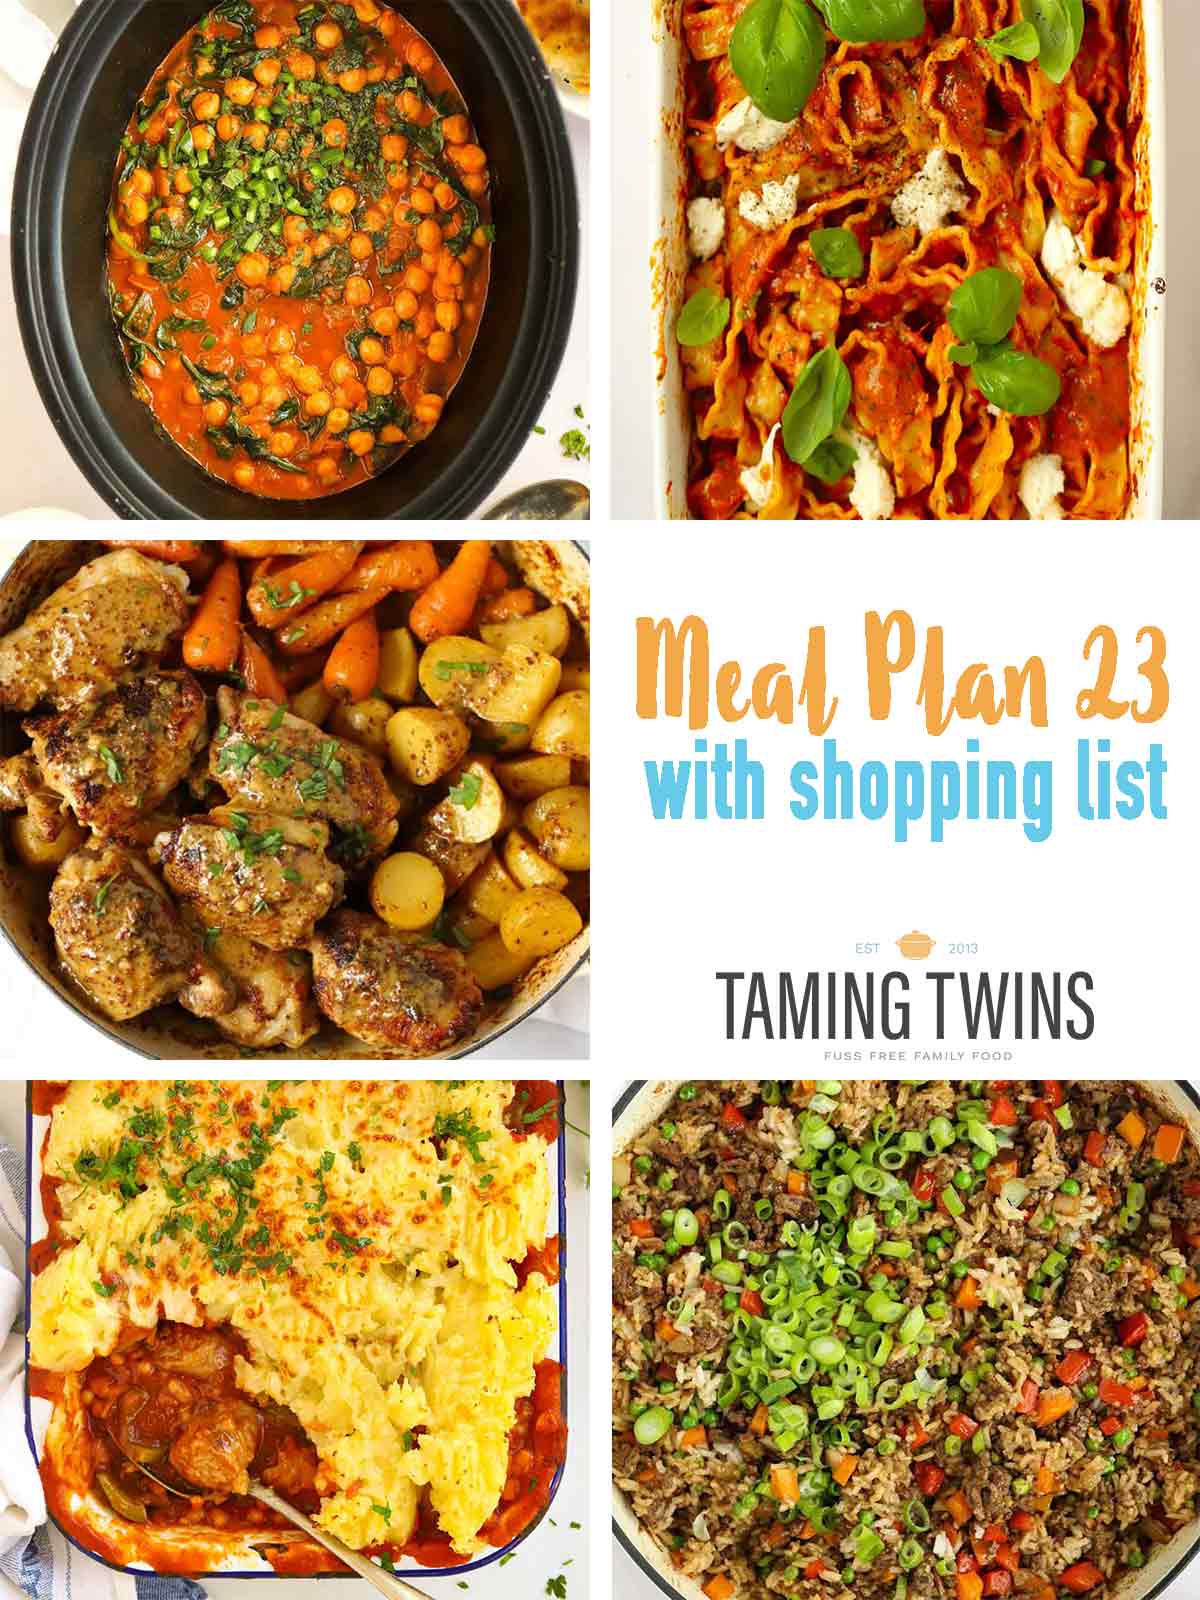 Five recipes included in Meal Plan 23.